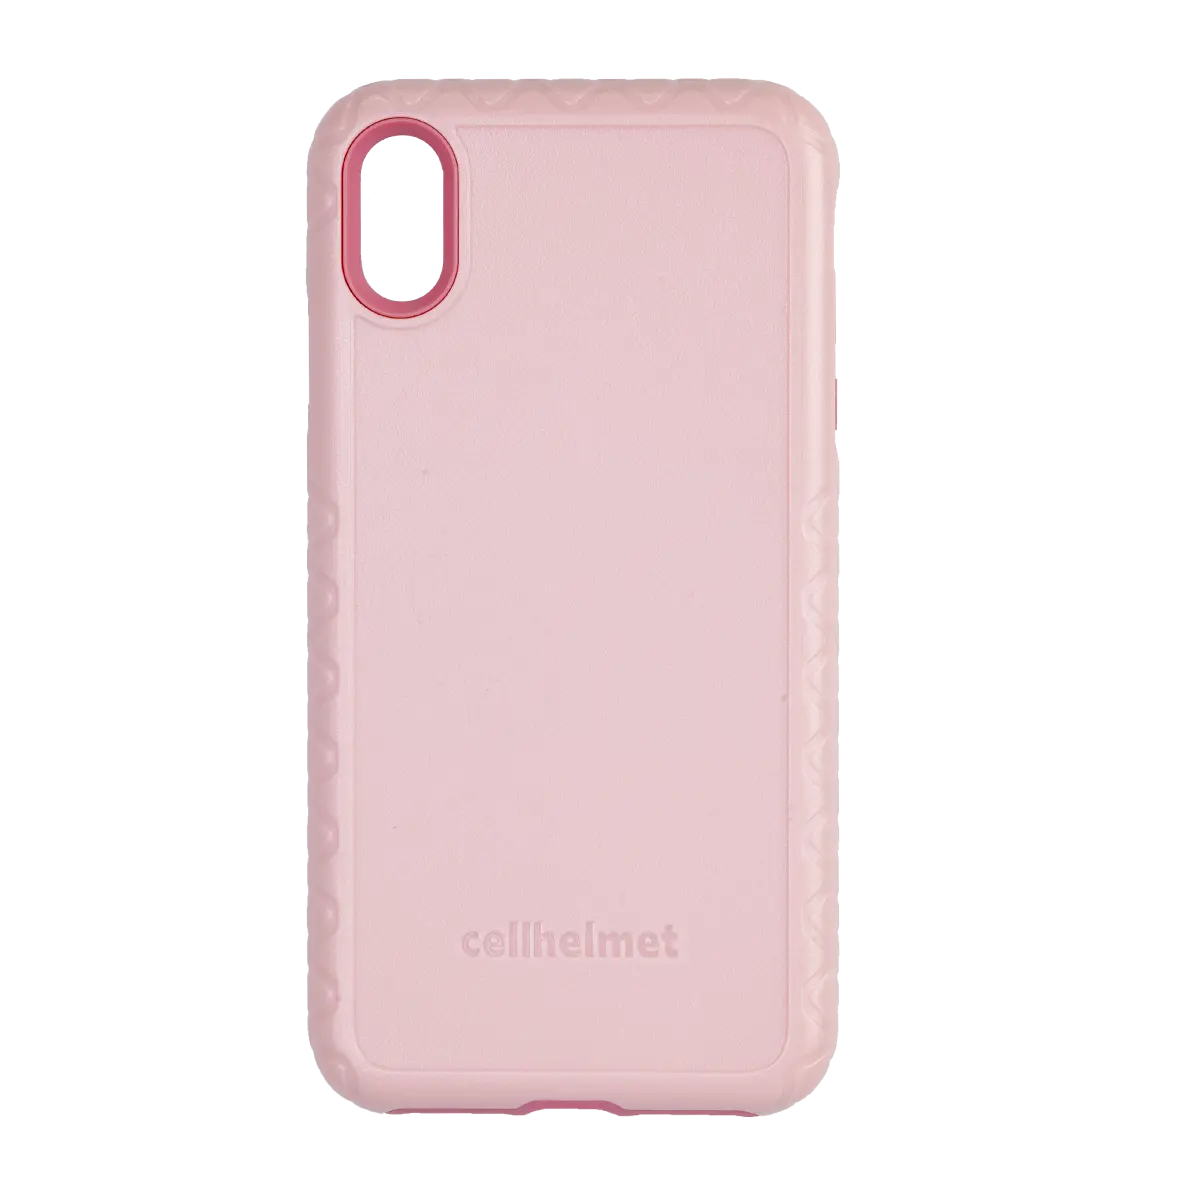 Pink cellhelmet Personalized Case for iPhone XS Max